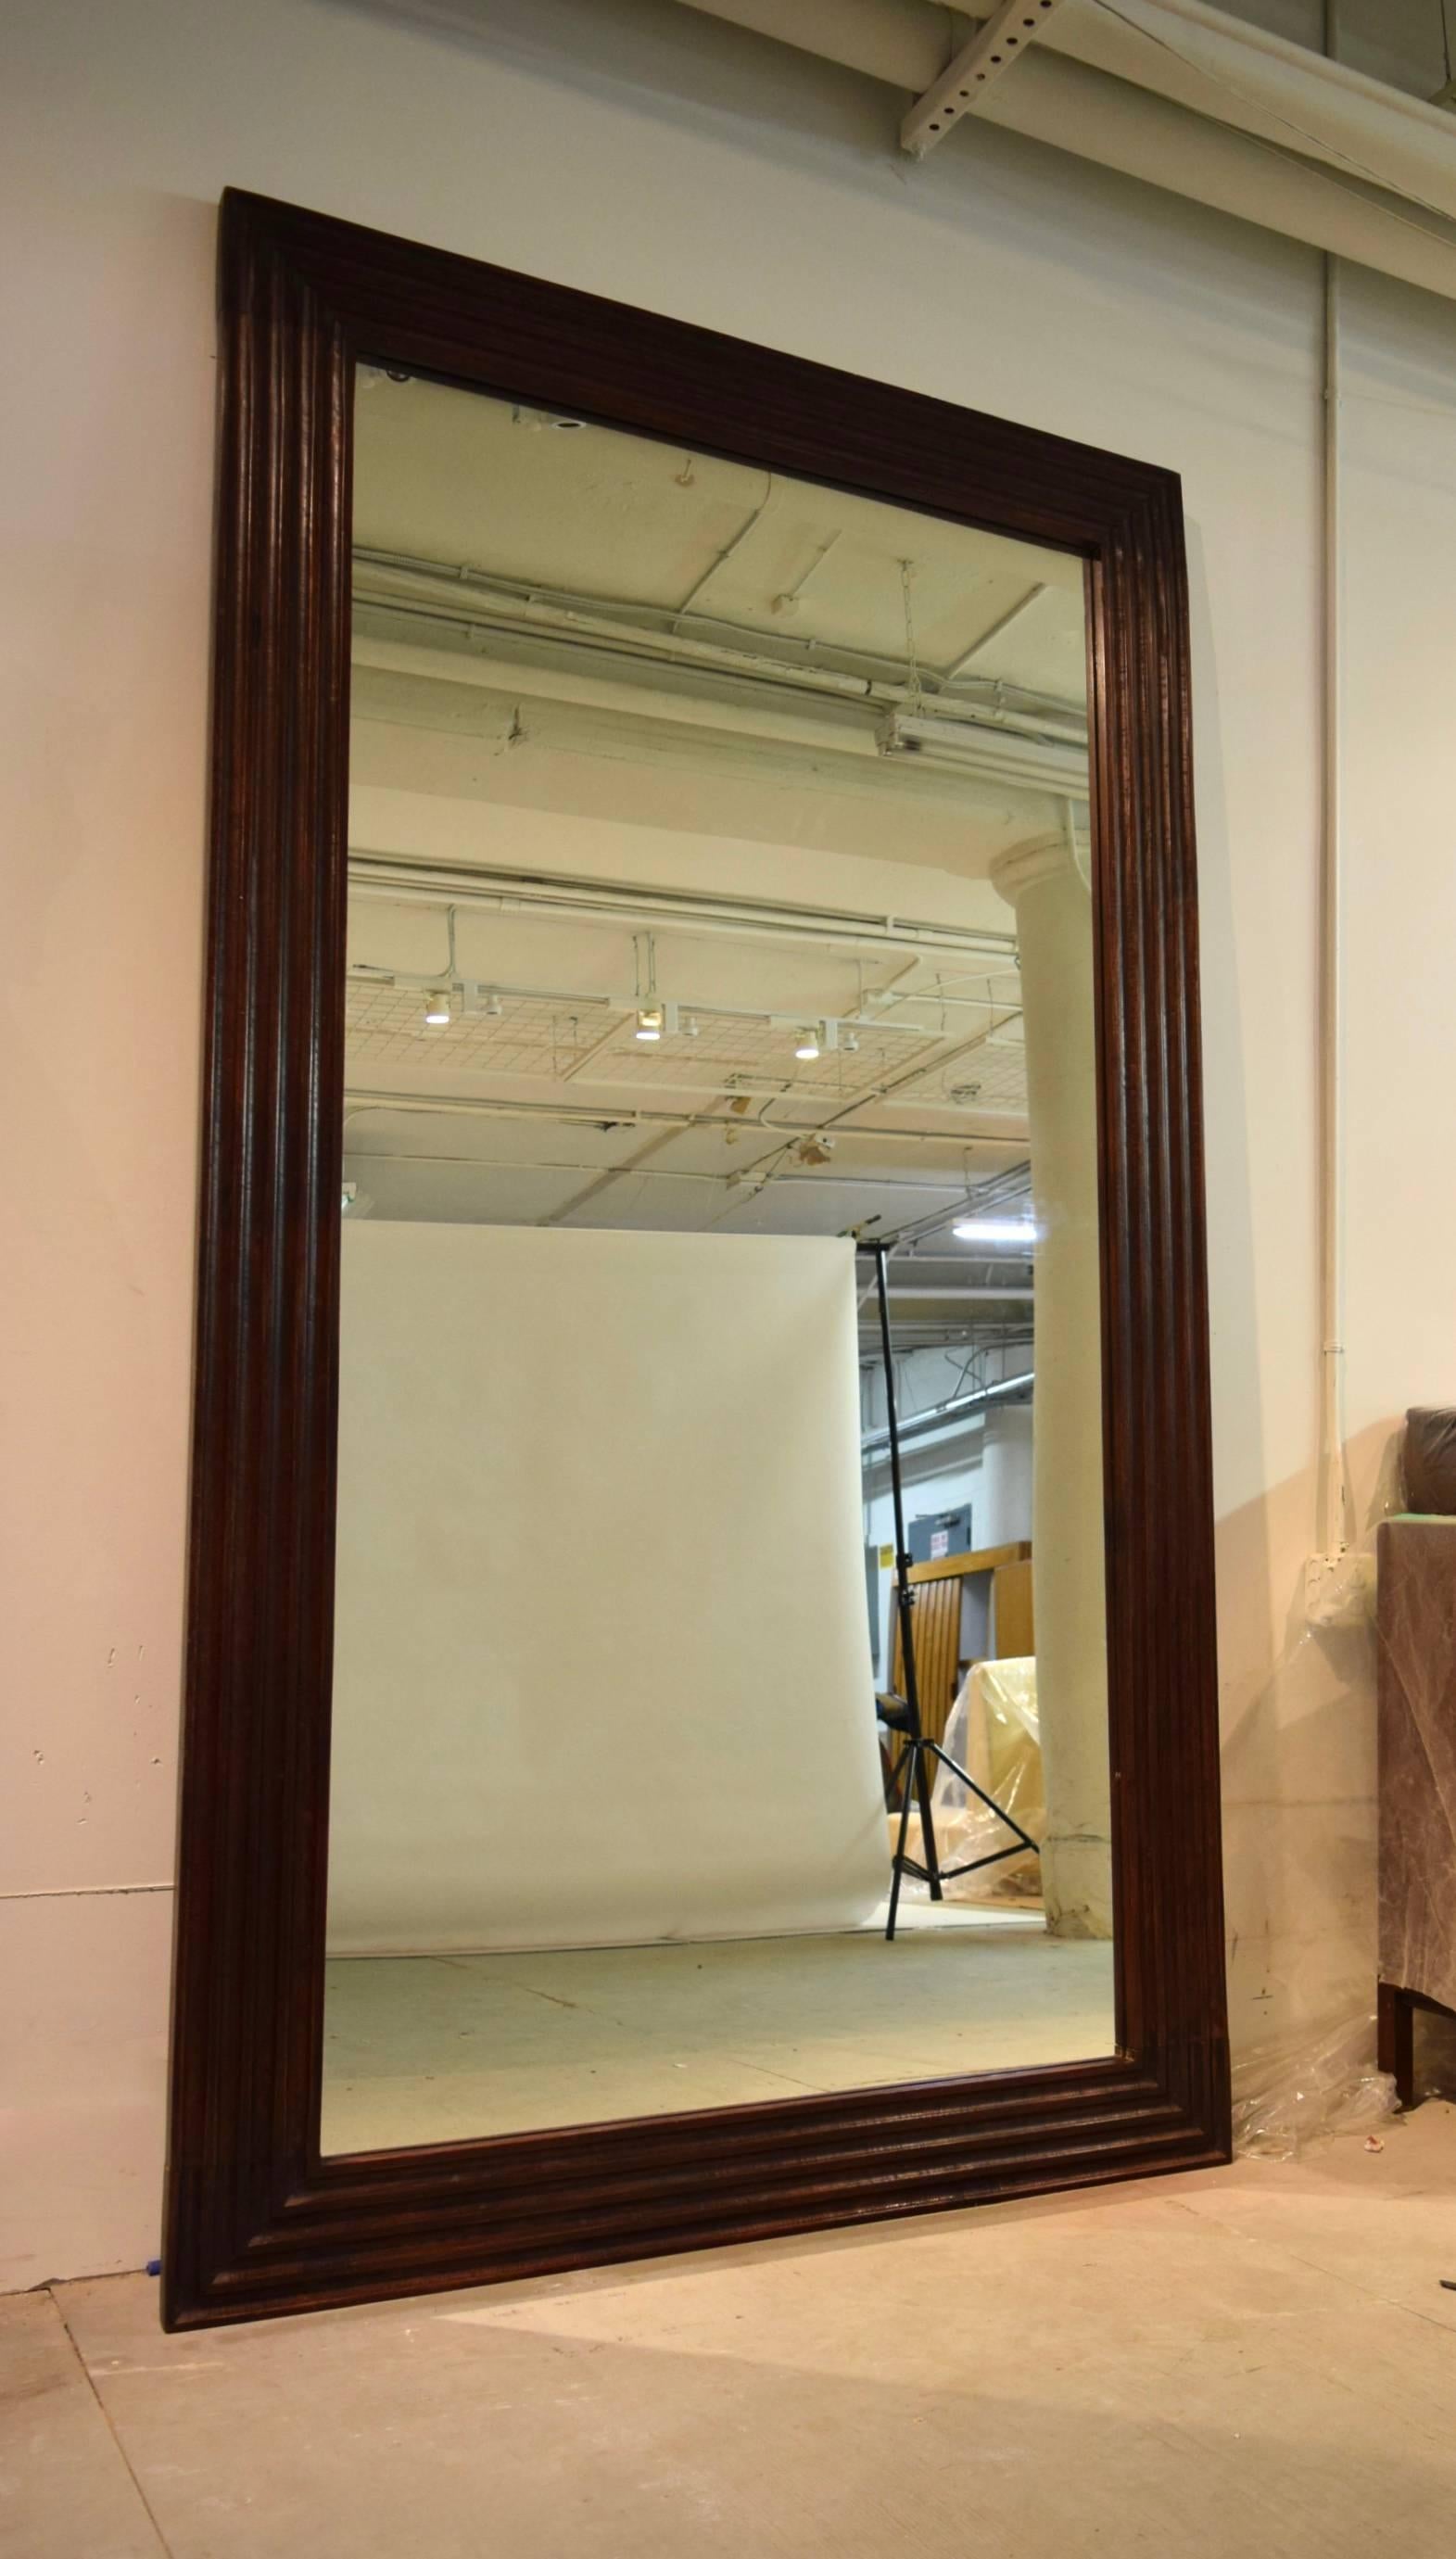 A pair of large scale, full length mirrors with hand fluted solid wood frames, both in very good, original condition. Both mirrors are ready to hang horizontally or vertically, and they can also be used as a floor mirror leaned against a wall as